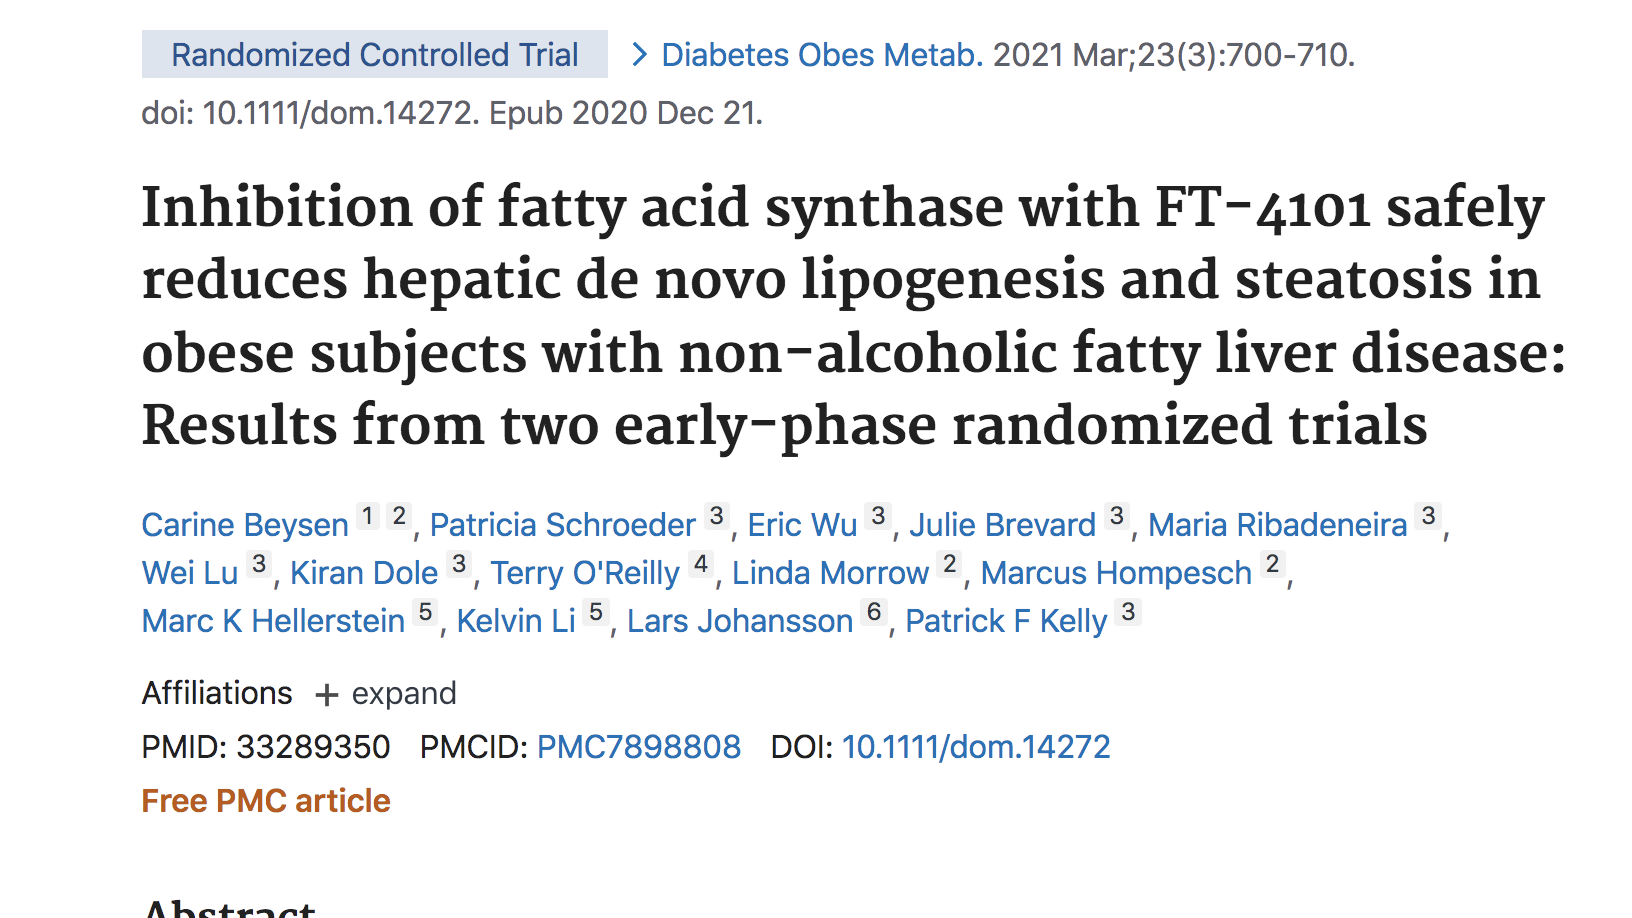 image of Inhibition of fatty acid synthase with FT-4101 safely reduces hepatic de novo lipogenesis and steatosis in obese subjects with NAFLD non-alcoholic fatty liver disease: results from two early